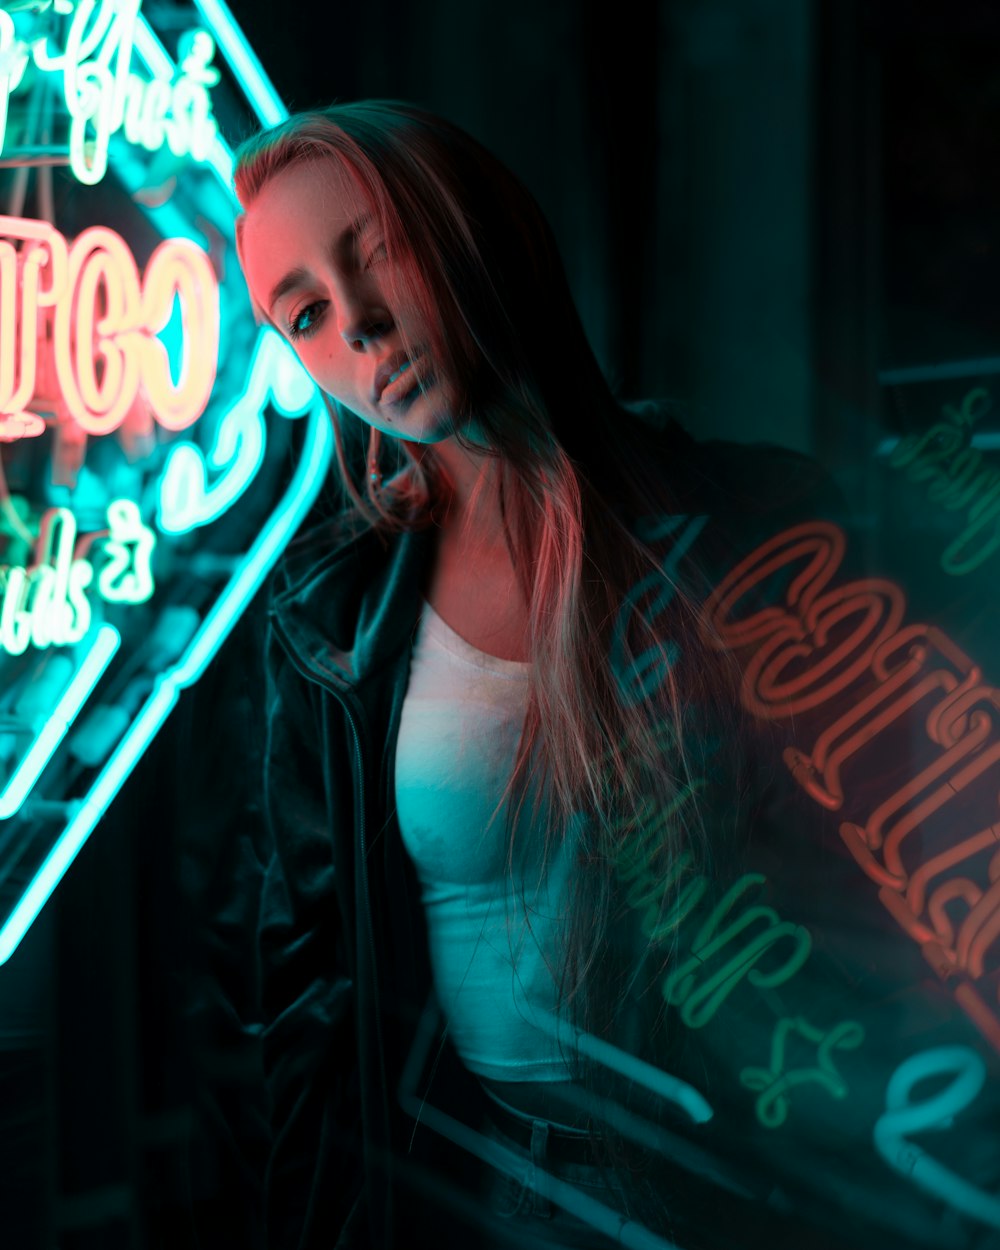 woman in white tank top standing near neon signage